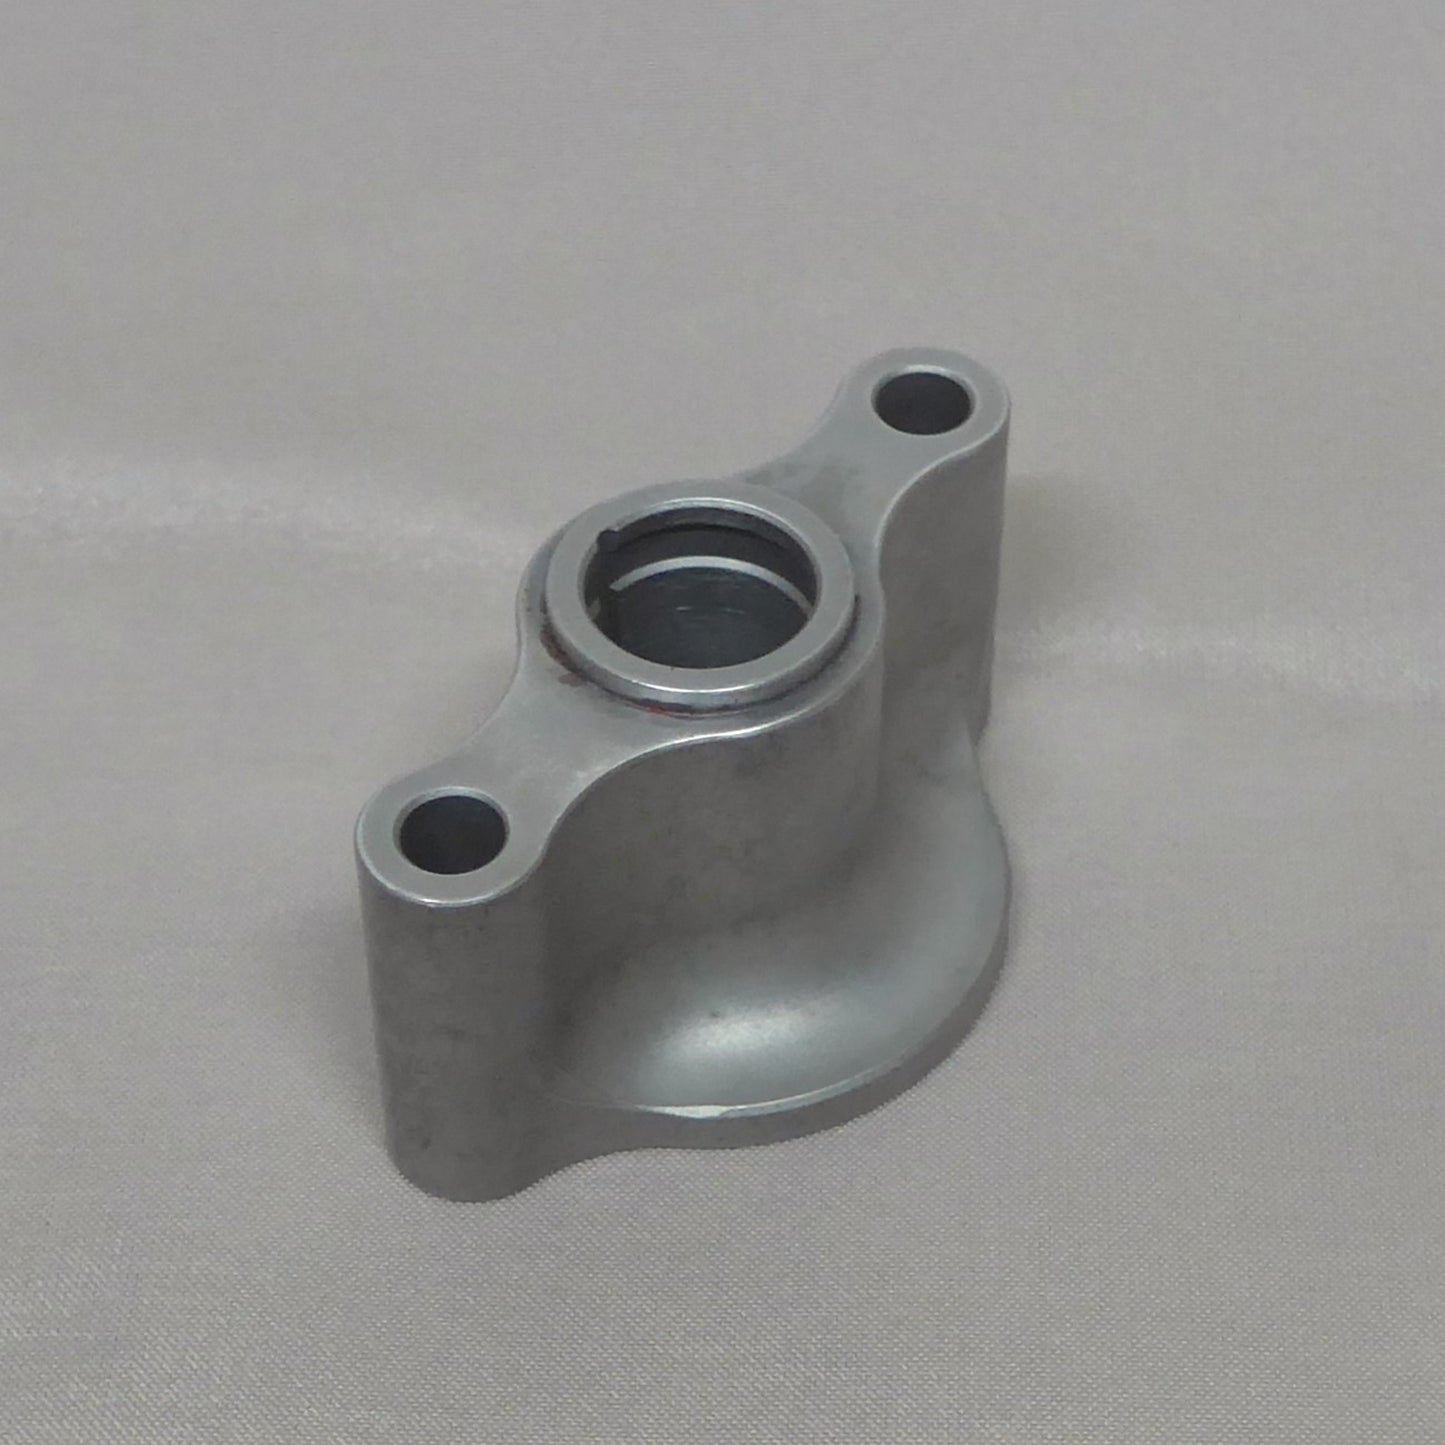 Distributor Mounting Spacer (A/R)